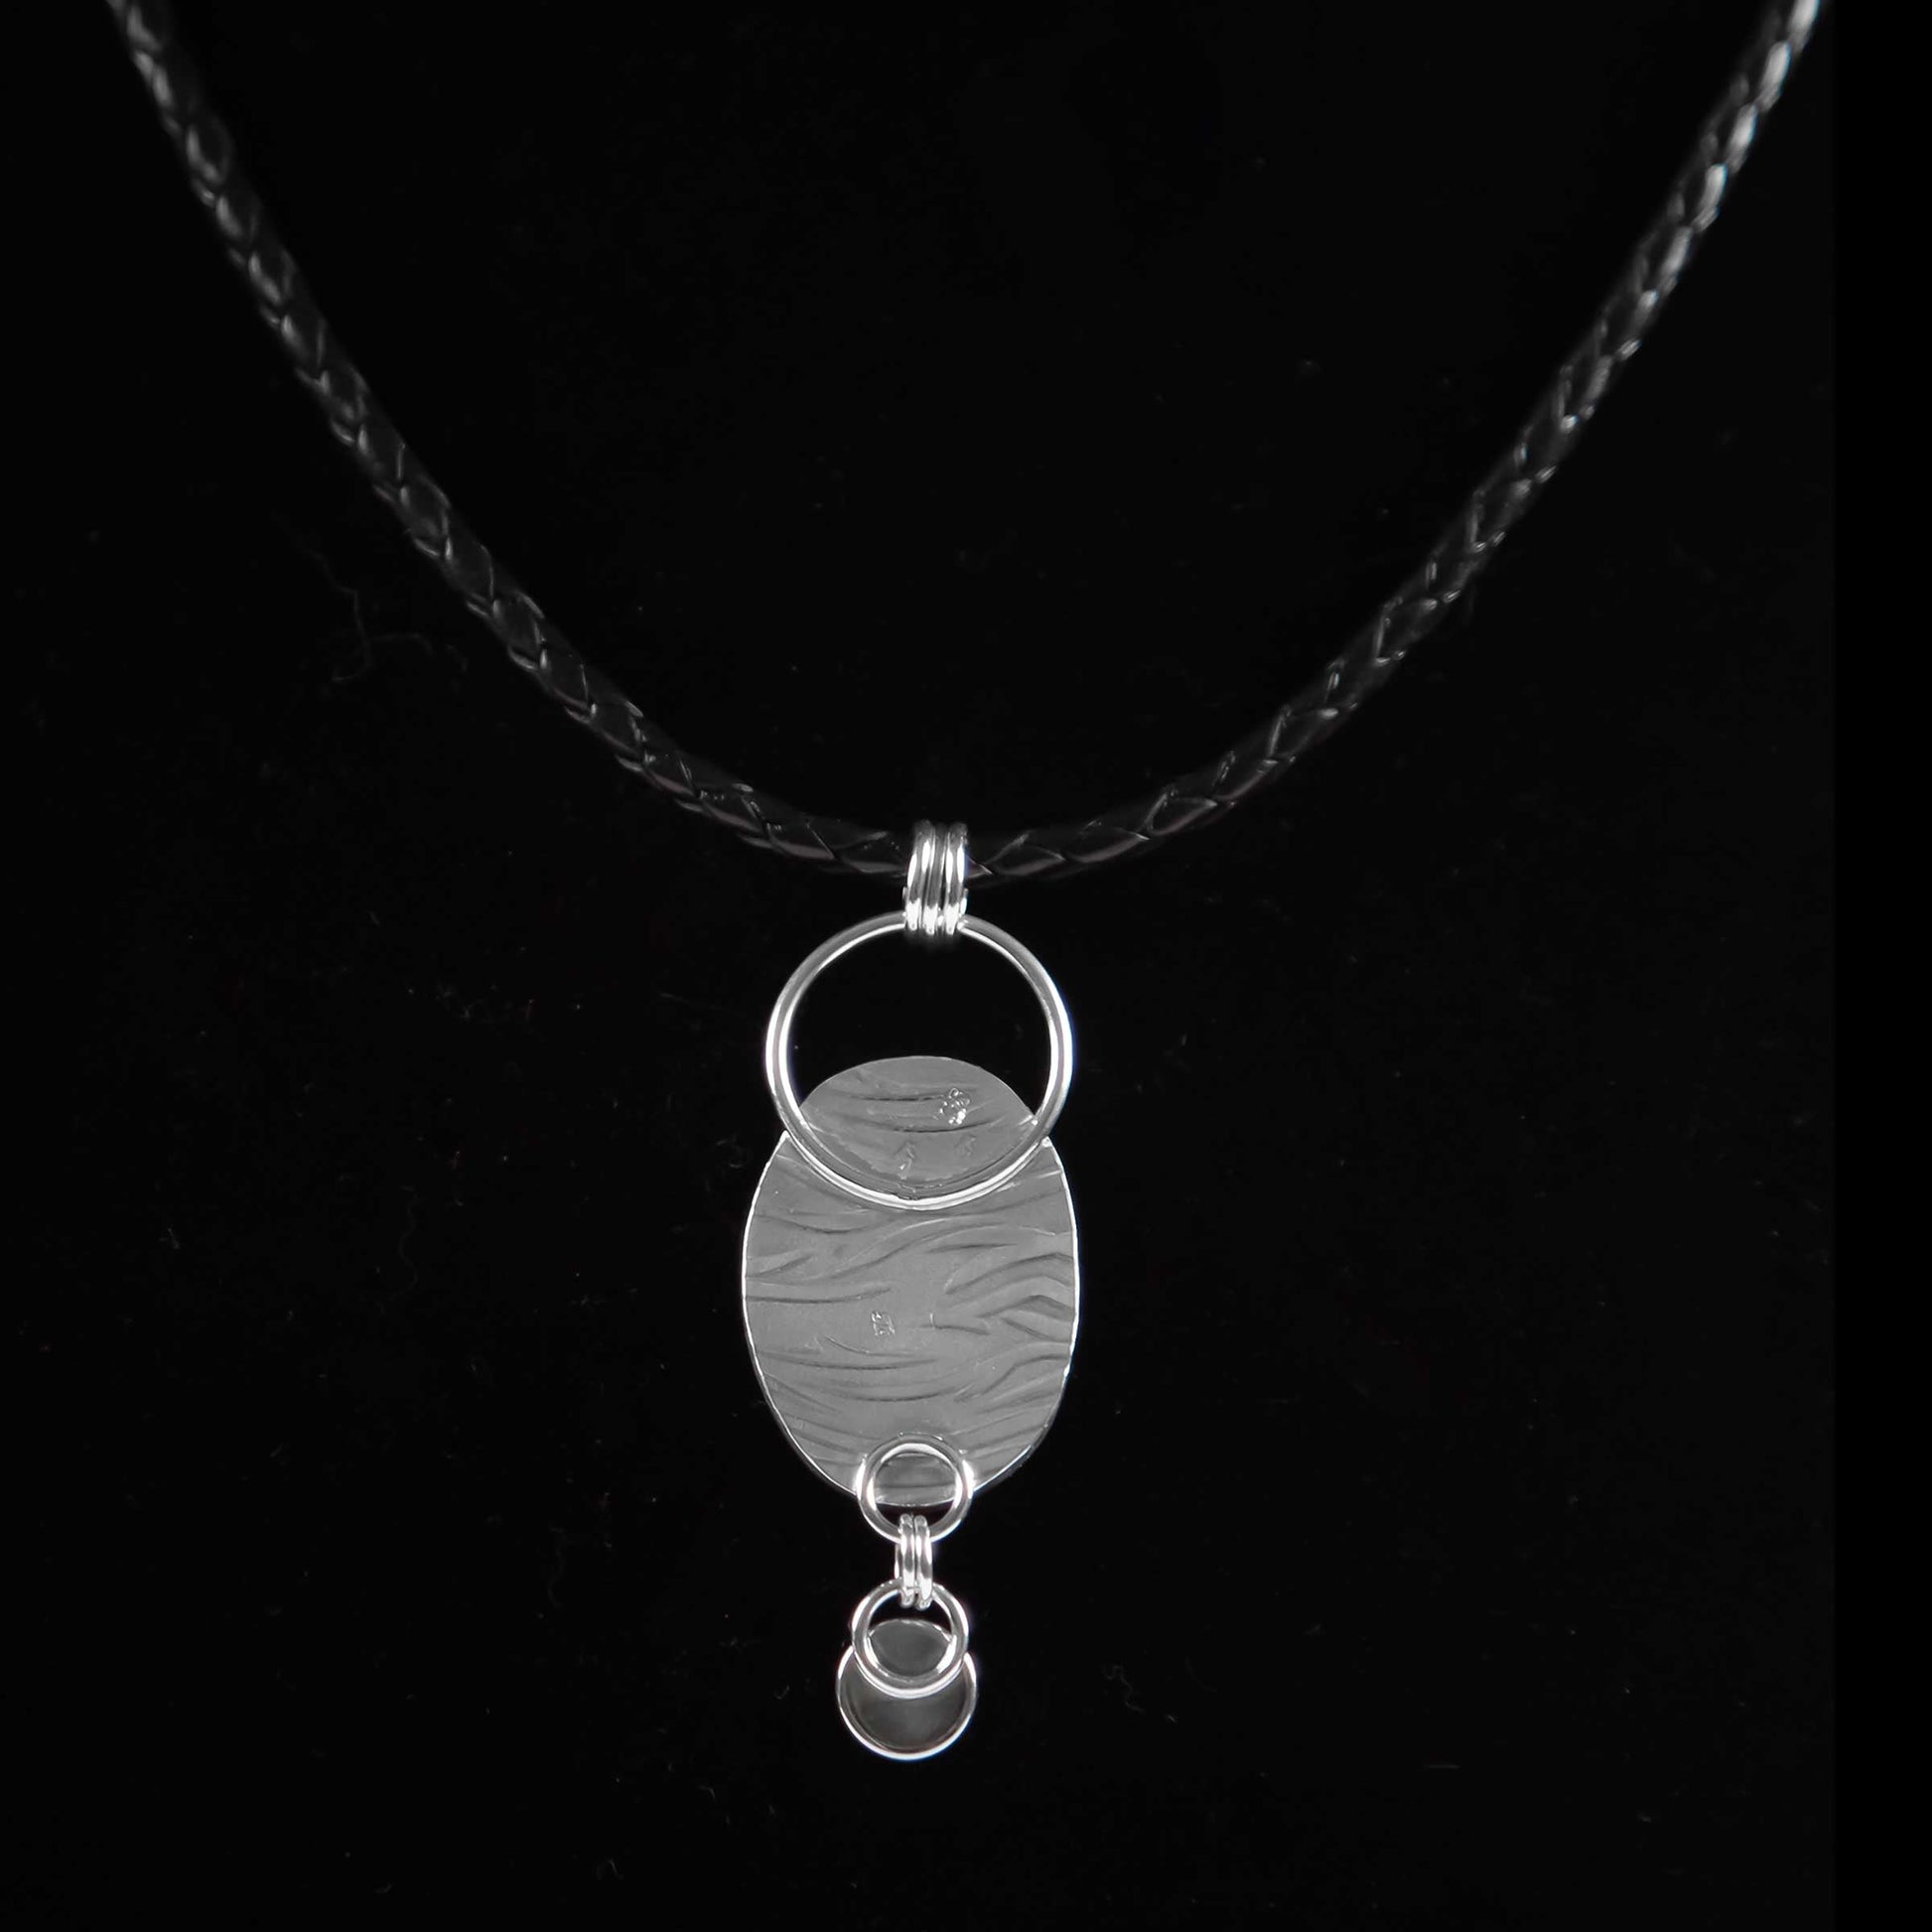 White stone, black lines, sterling silver,  textured back, 20-inch black leather chain with clasp, Onyx stone,  Dendritic Opal, Onyx Pendant, 2.25" x .75"